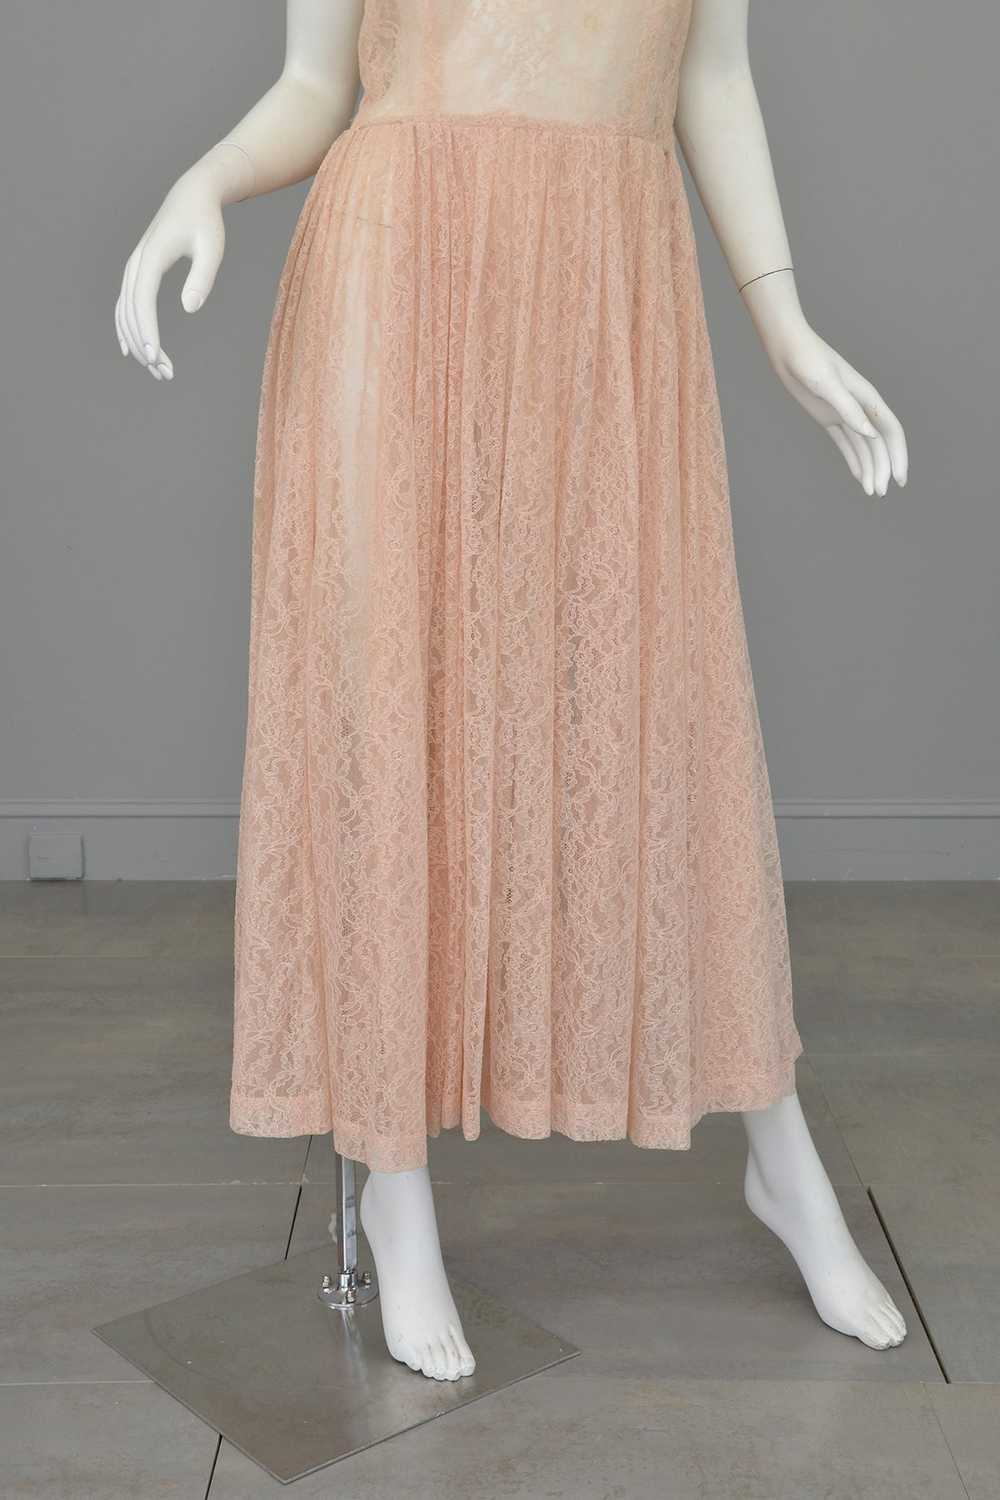 1940s 50s Sheer Light Pink Embroidered Lace Gown - image 7